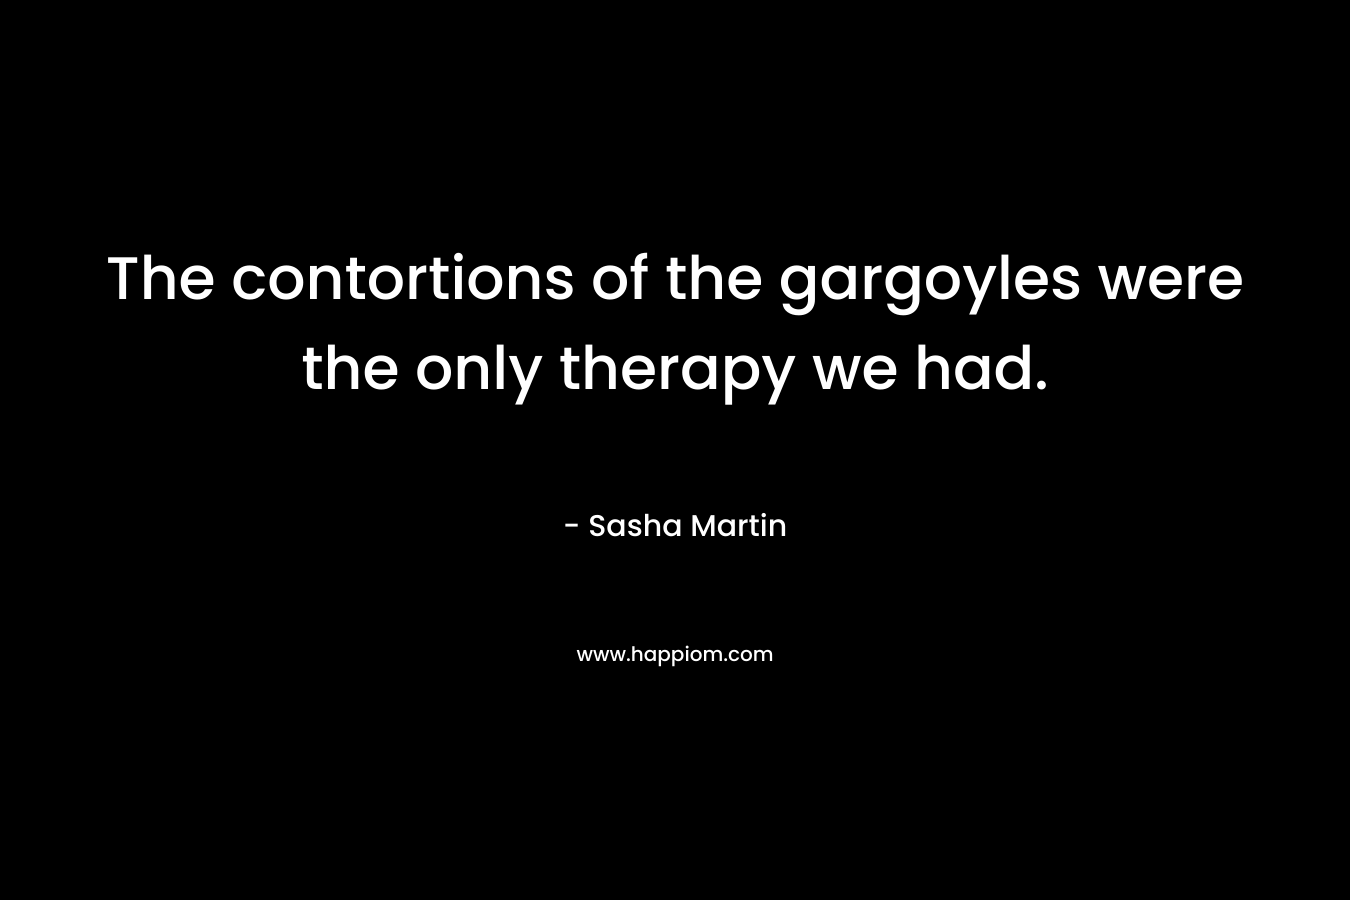 The contortions of the gargoyles were the only therapy we had. – Sasha Martin